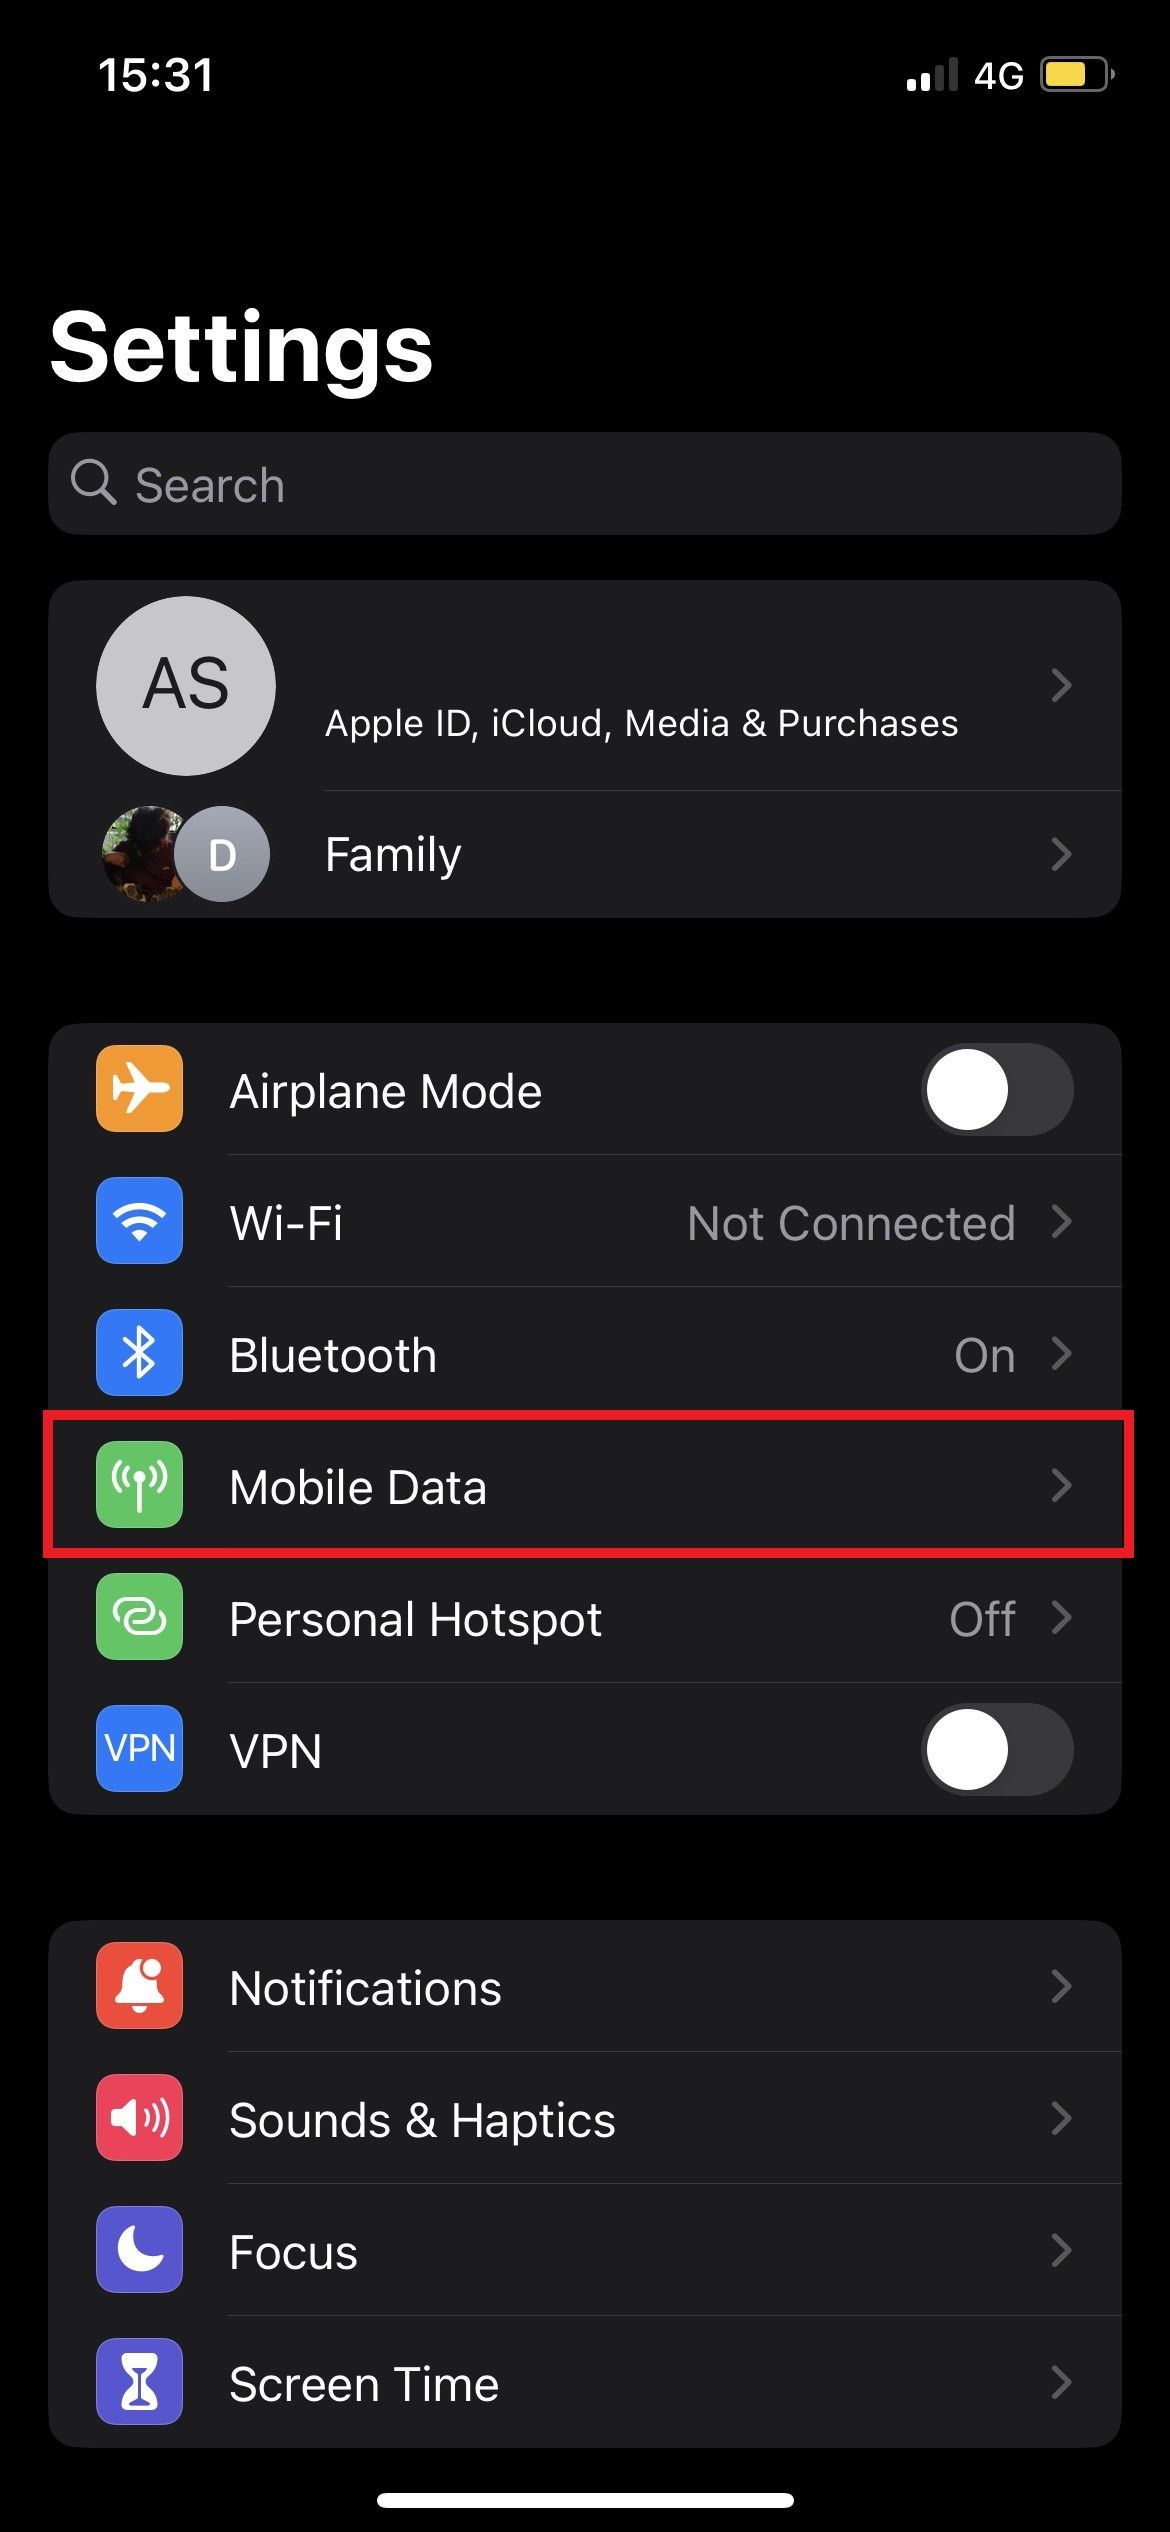 Image pointing out Apple's mobile data option in Settings